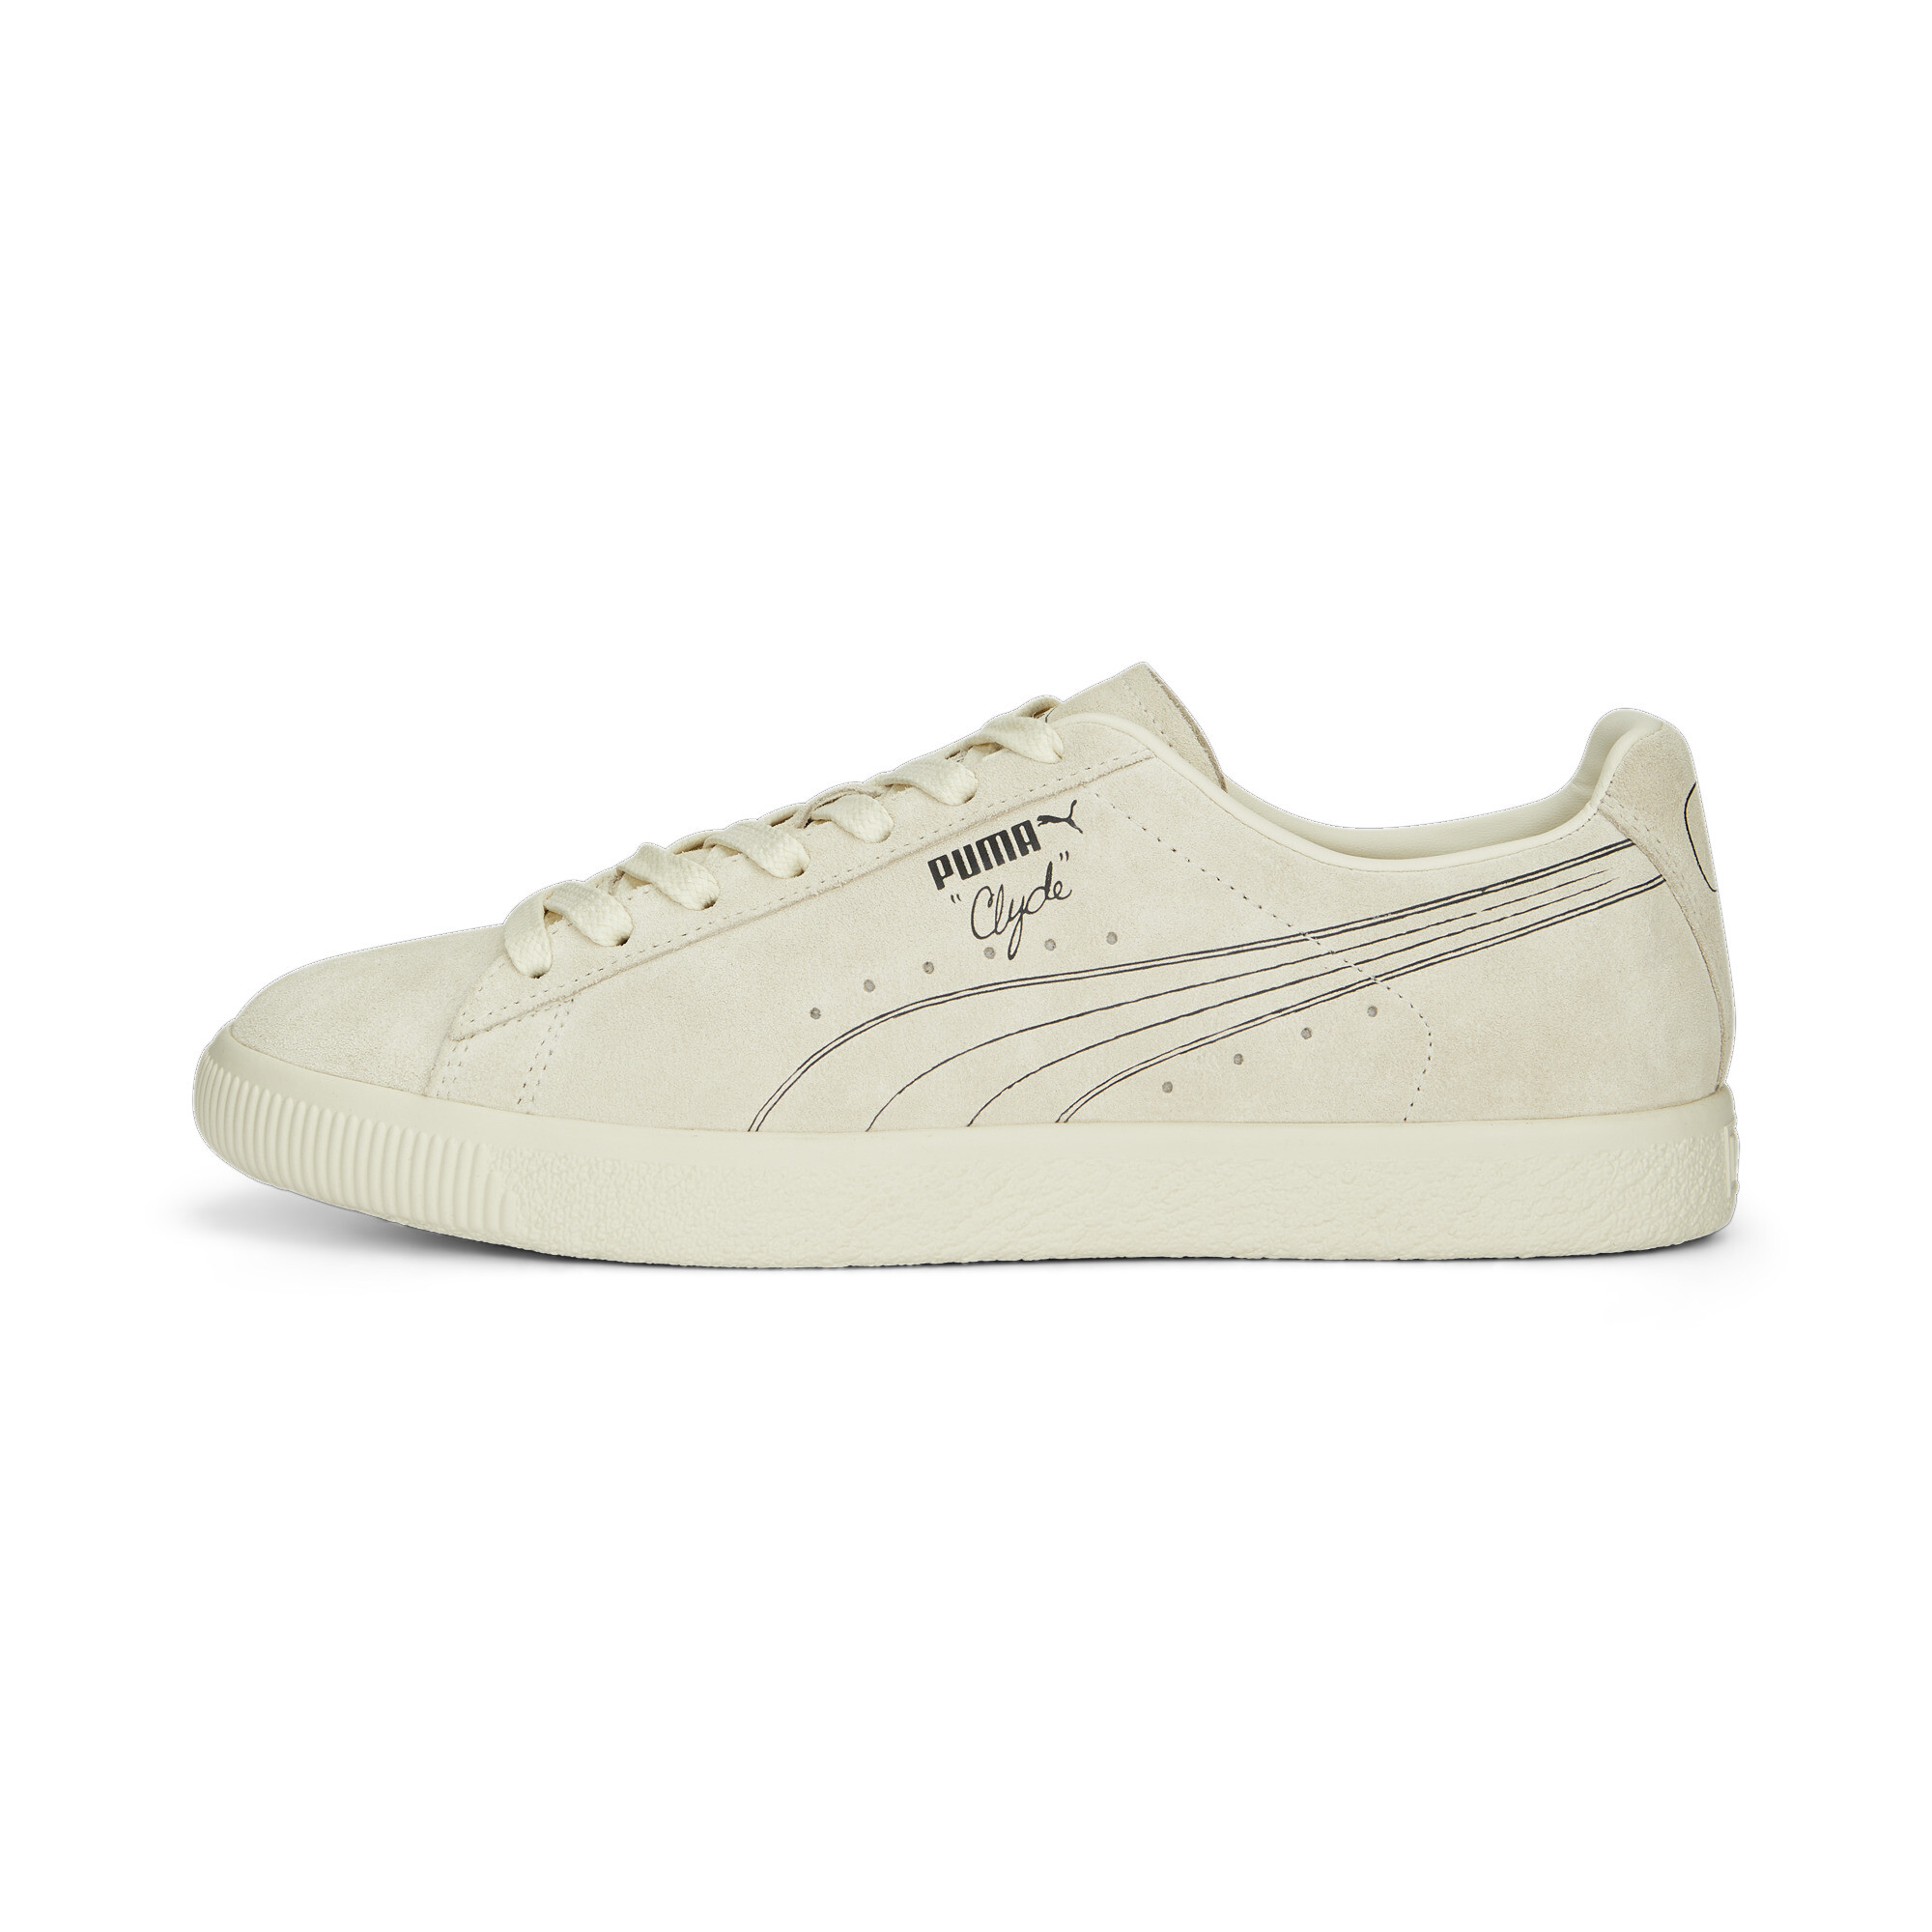 Puma Clyde No.1 Sneakers, White, Size 37, Shoes